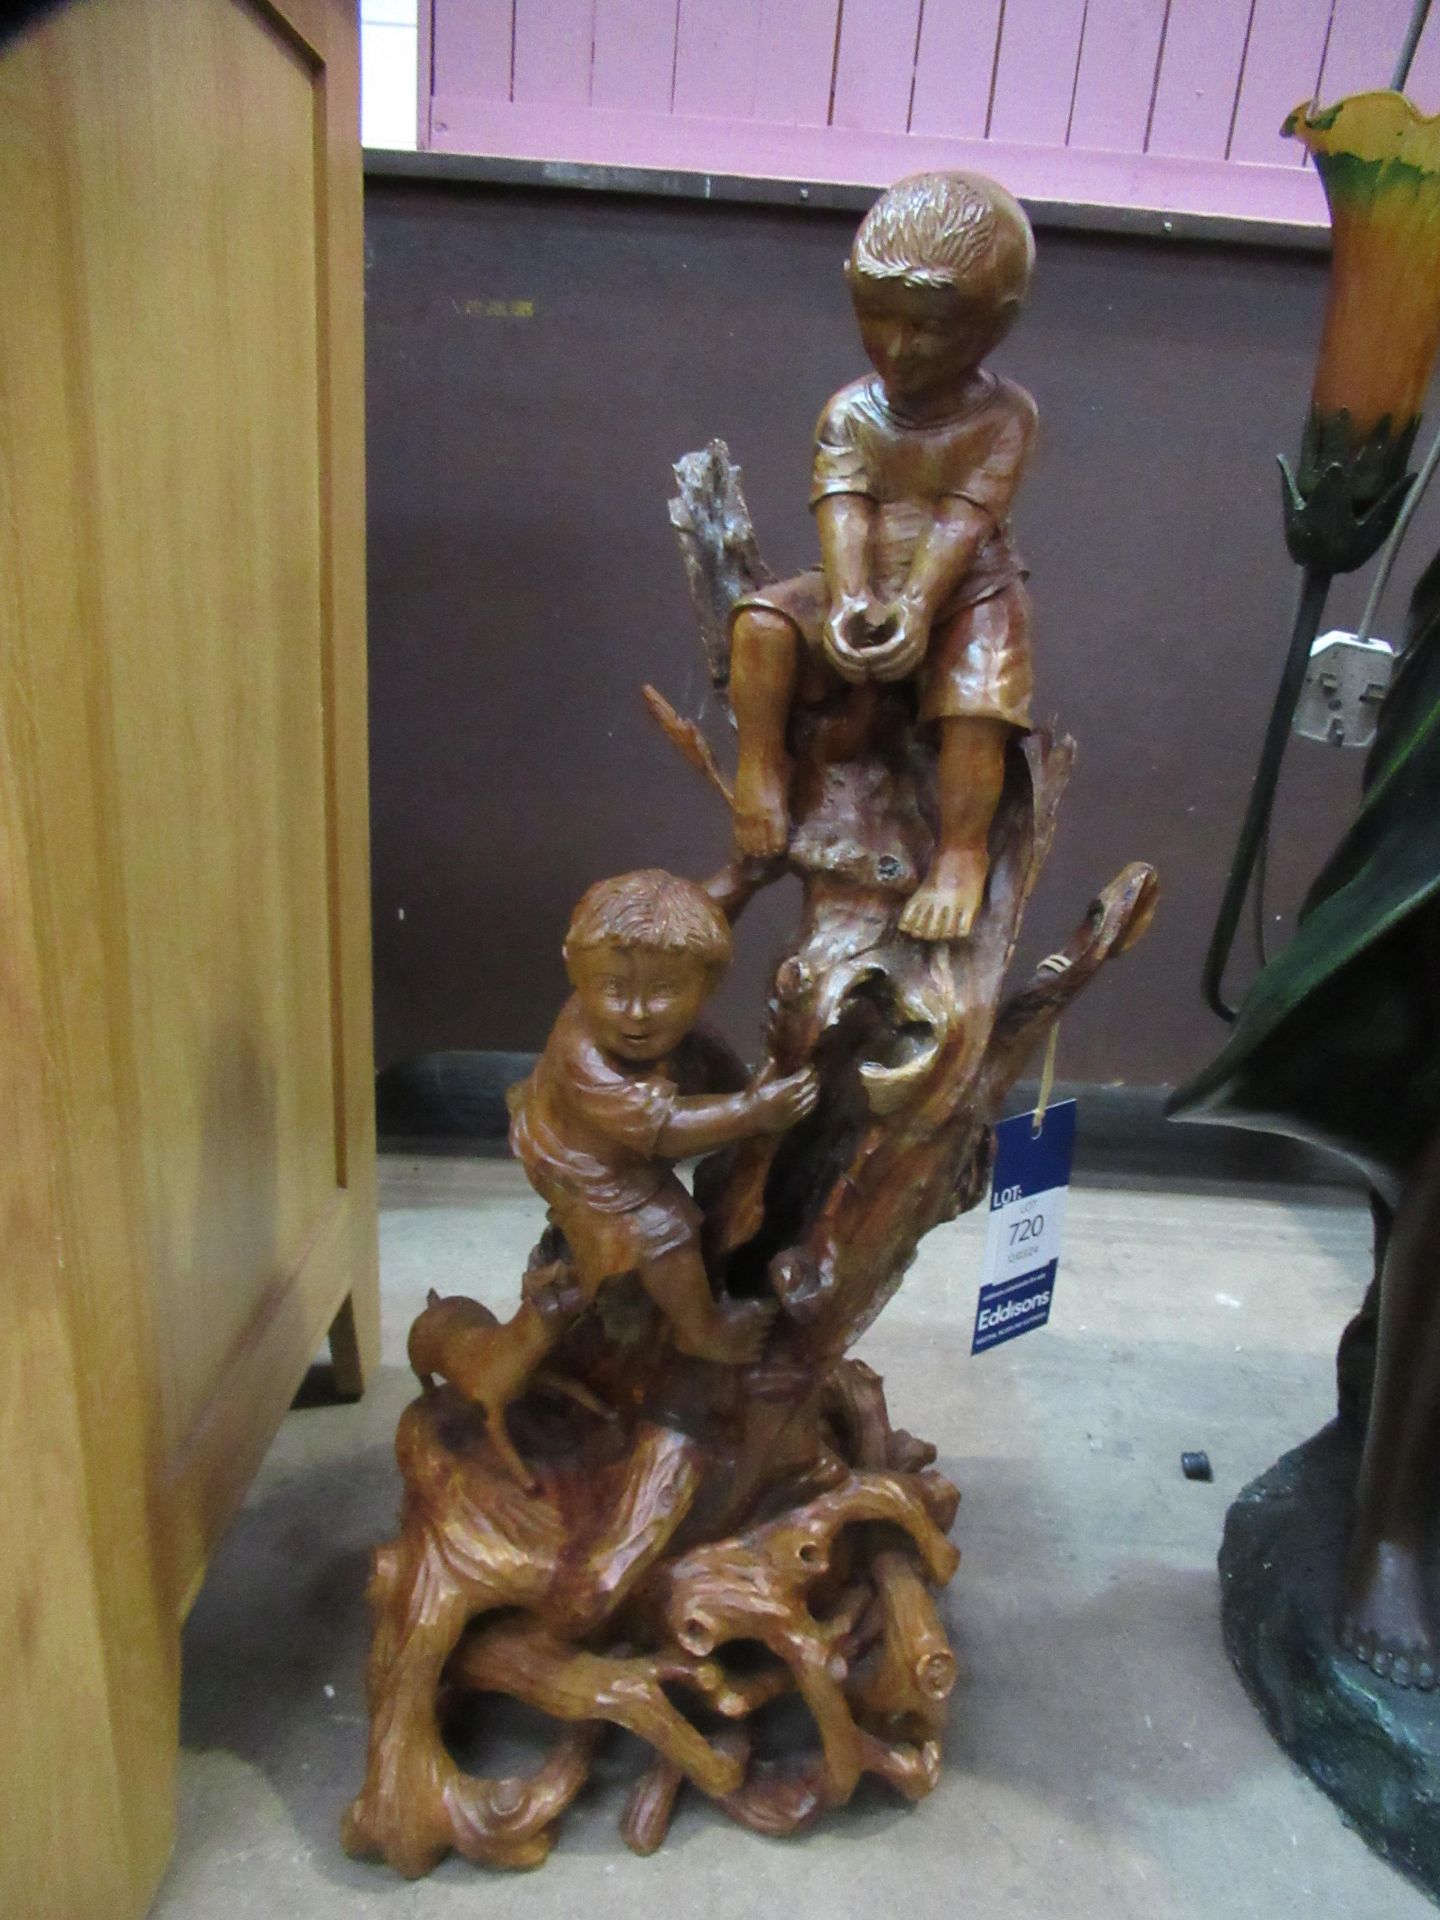 Carved Wooden Figure Depicting Two Boys - Image 2 of 14